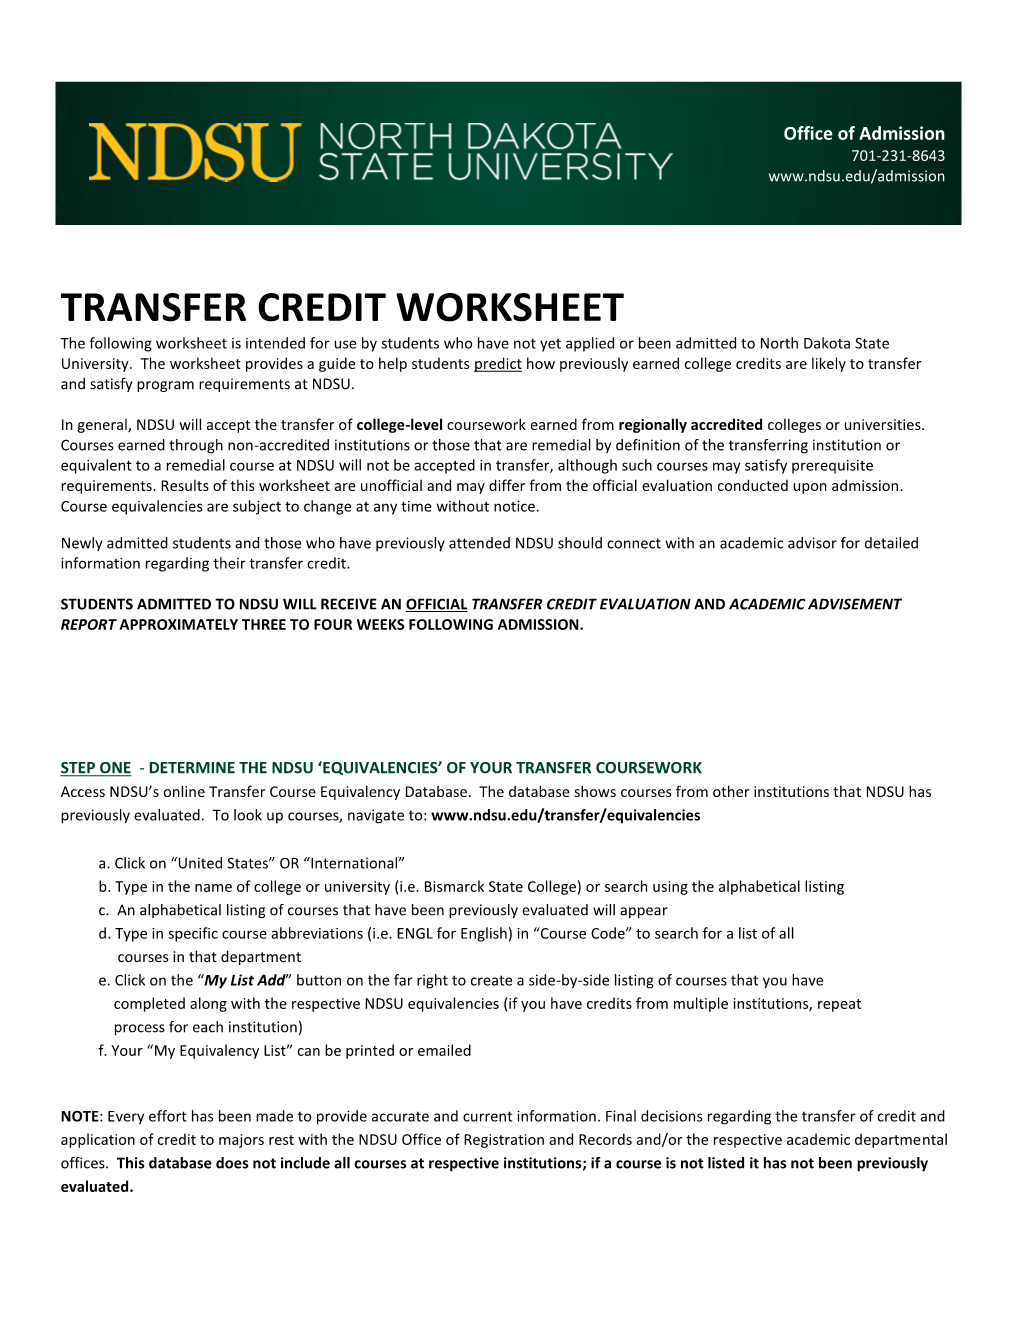 TRANSFER CREDIT WORKSHEET the Following Worksheet Is Intended for Use by Students Who Have Not Yet Applied Or Been Admitted to North Dakota State University